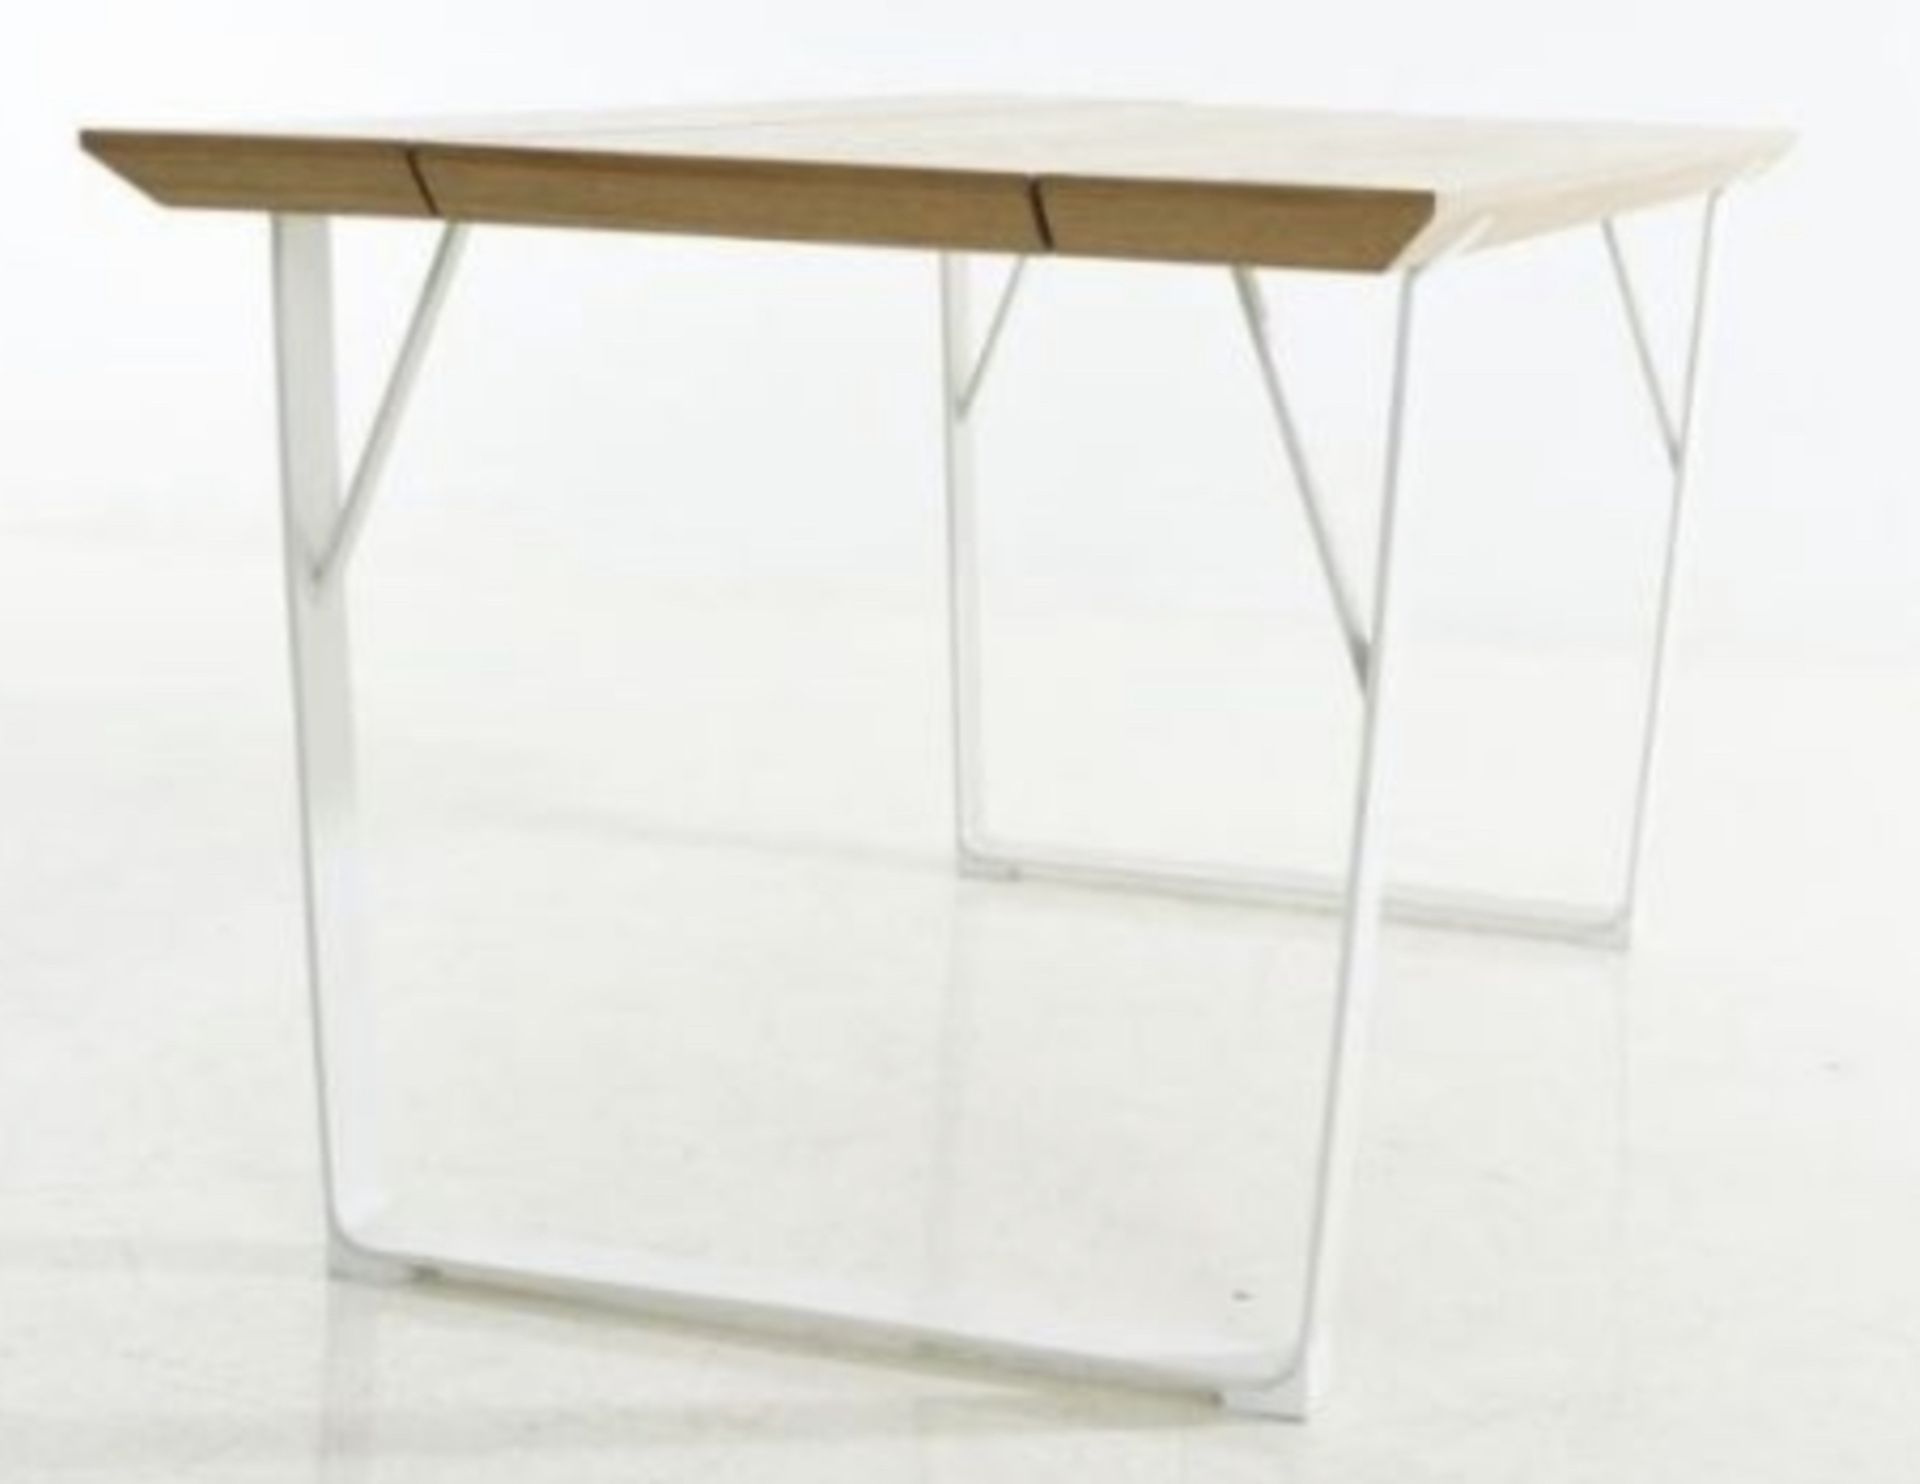 Battersea Scandinavian Style Dining Table   -  New Stock -   HUGE RRP! - Image 3 of 4